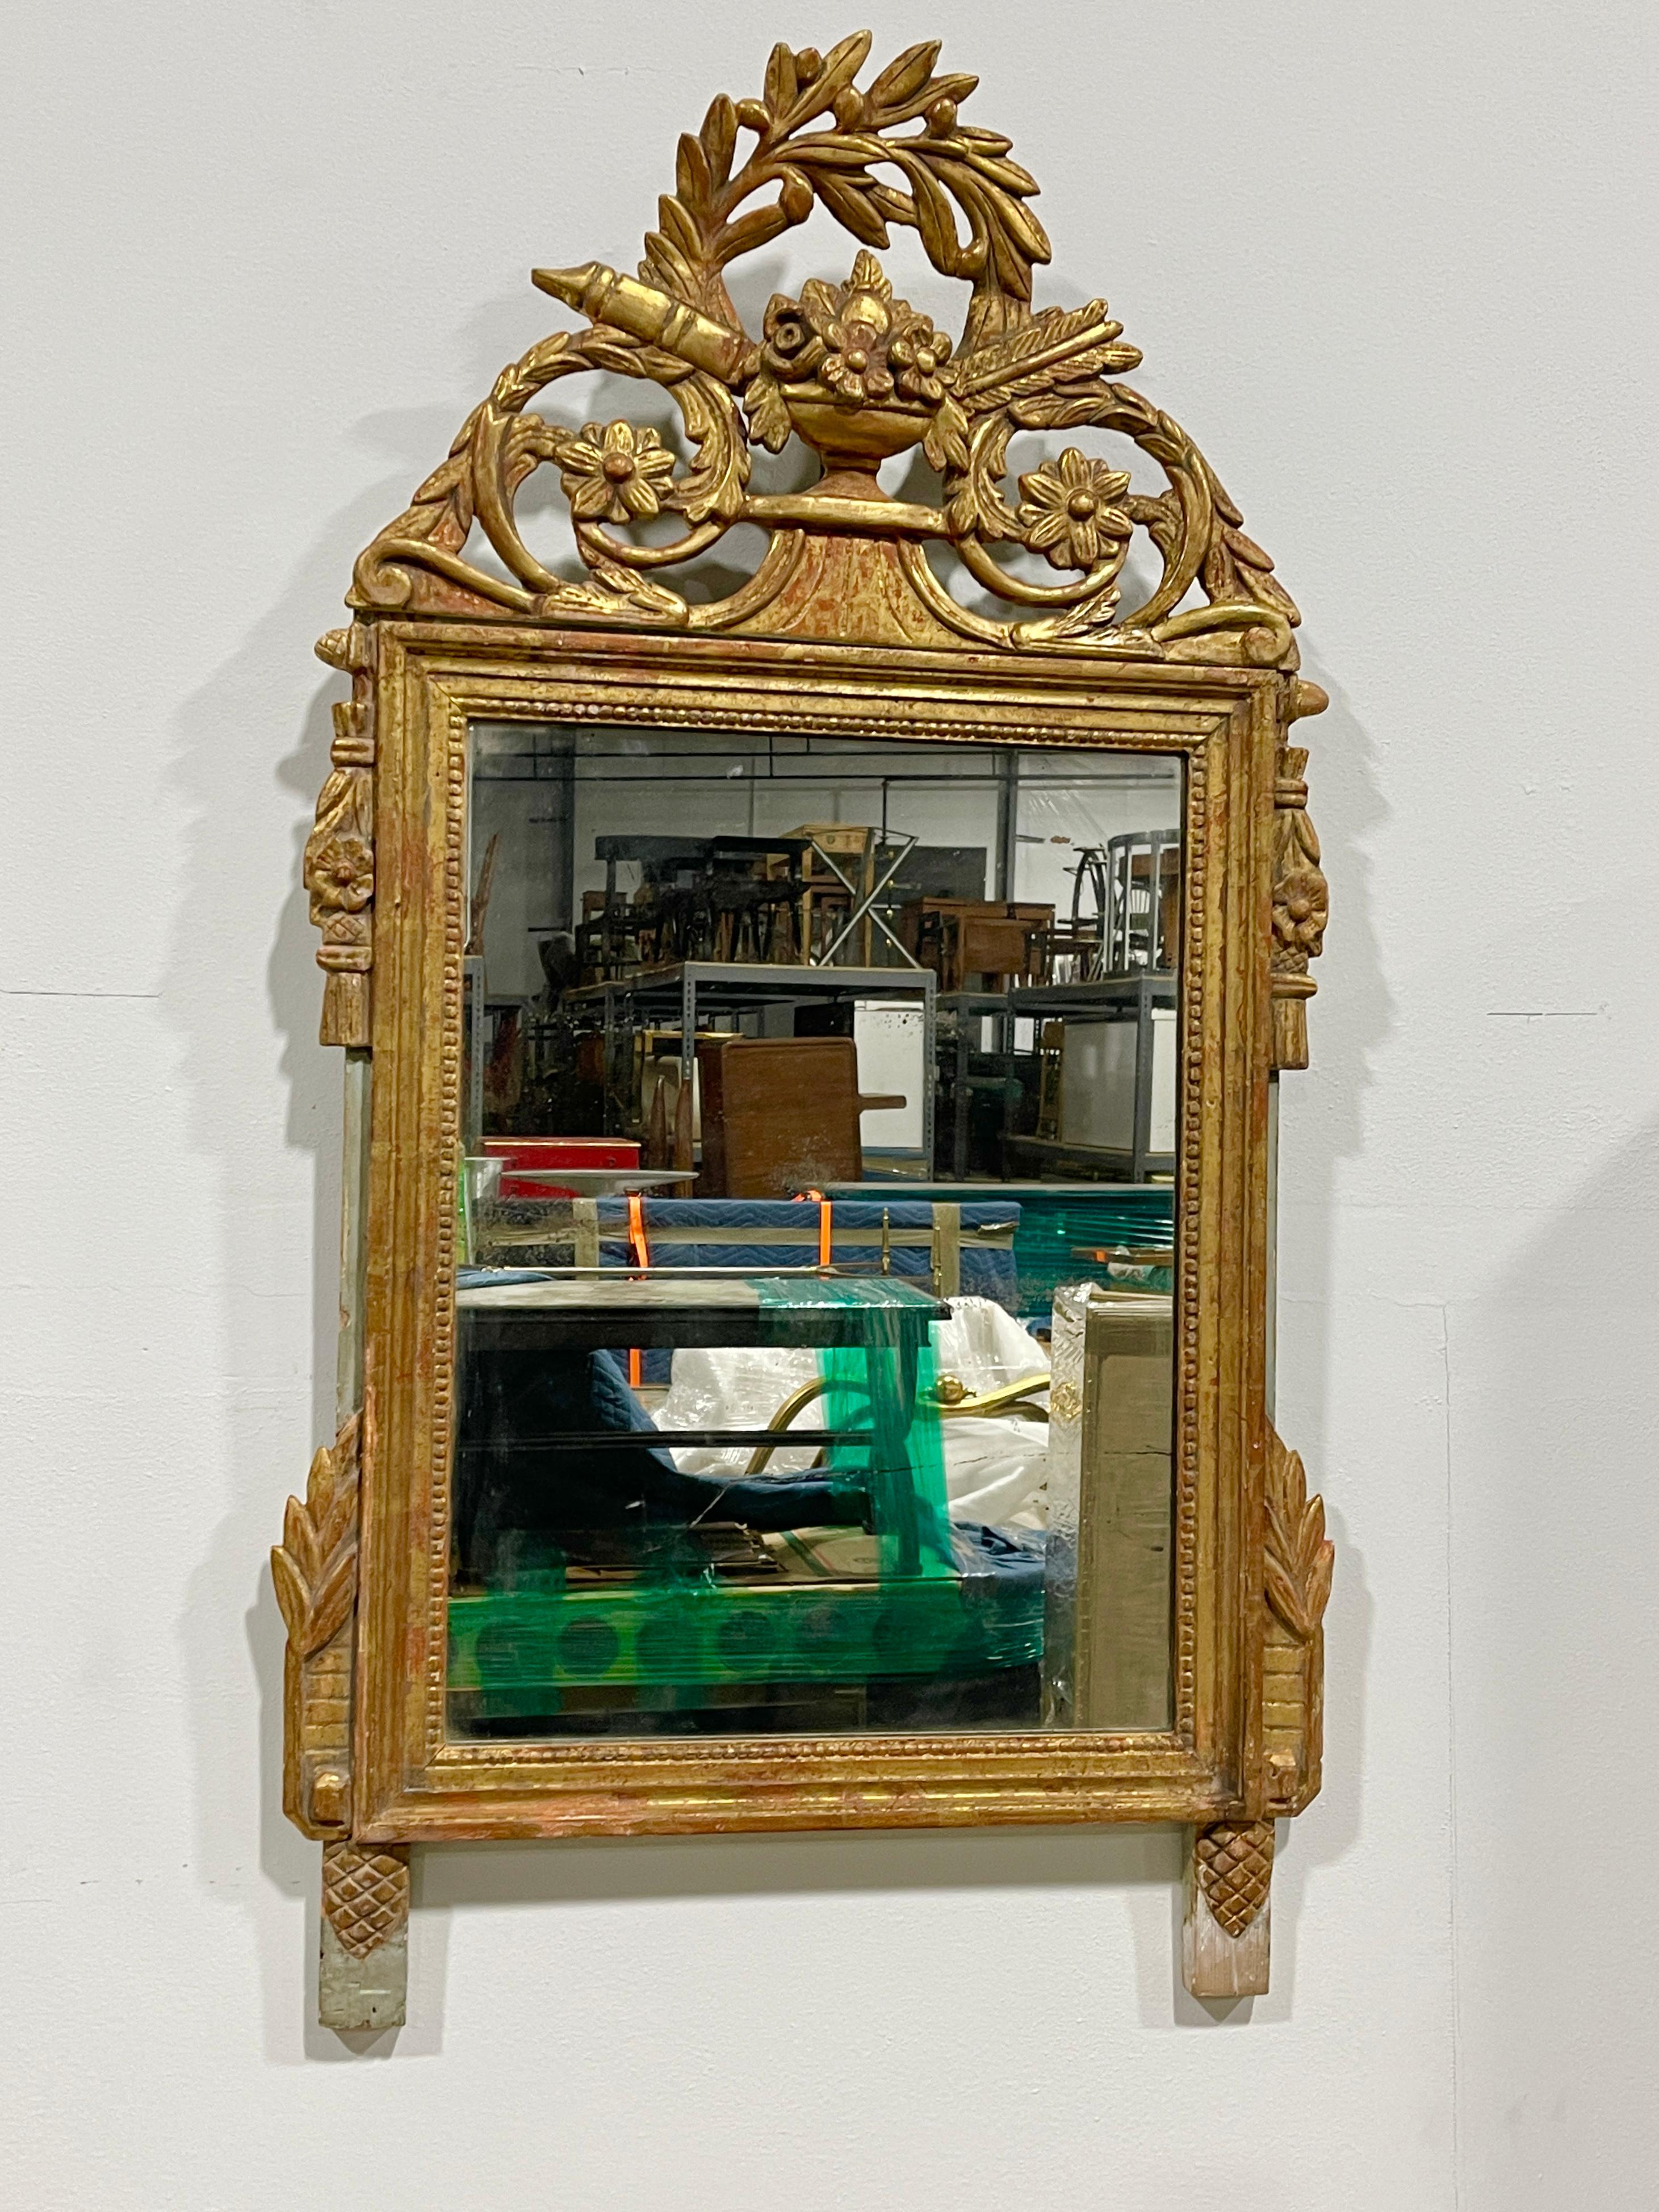 French Louis XVI gilt wood mirror with nicely carved details, surmounted with an intricately carved crown with a central urn form, quiver and arrow, acanthus leaves and plant forms. Possibly a family crest.
46